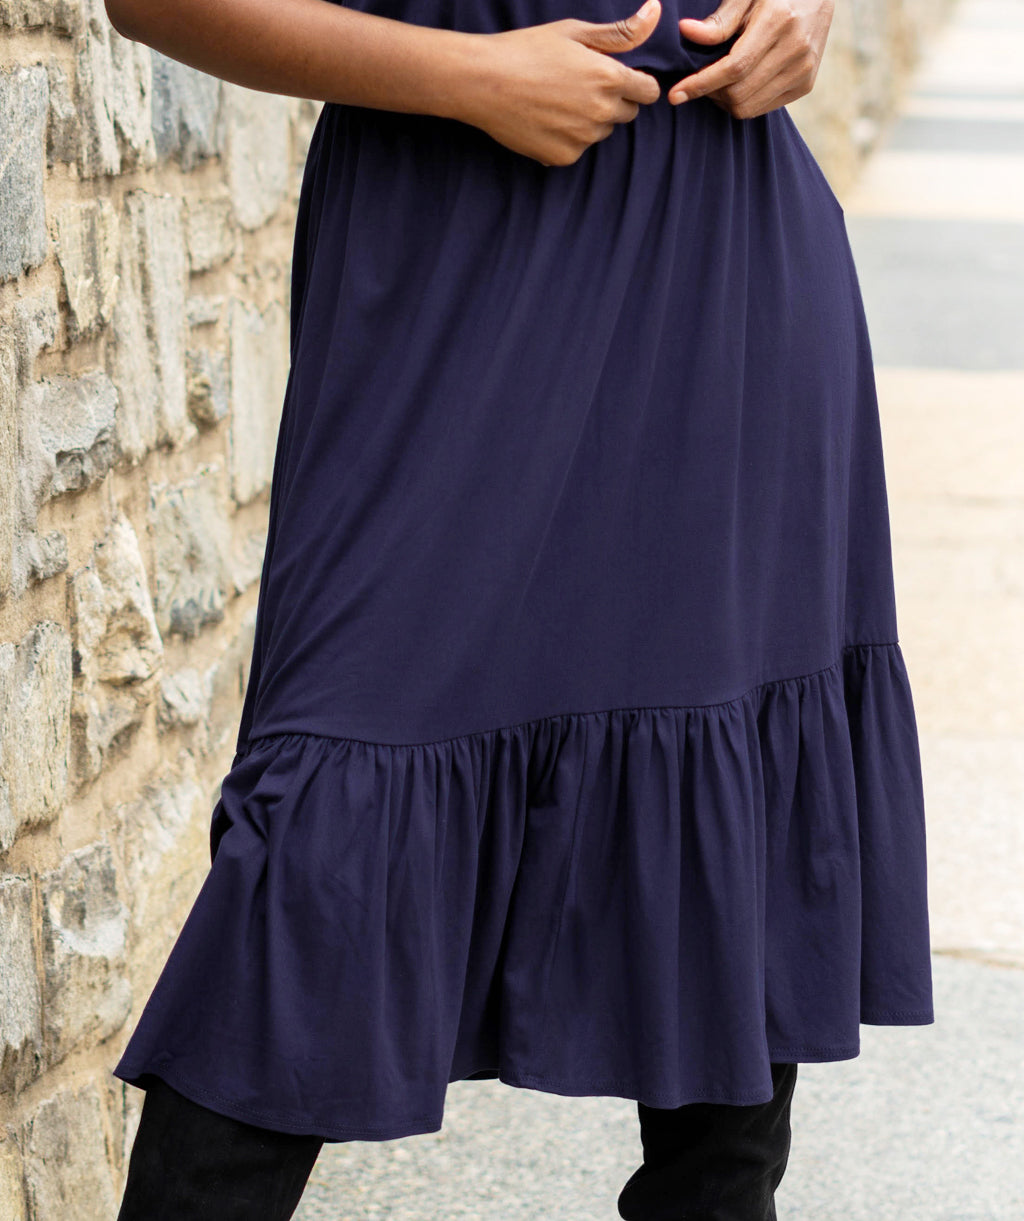 MURRAY tiered skirt in Navy<br/>(Less than perfect)